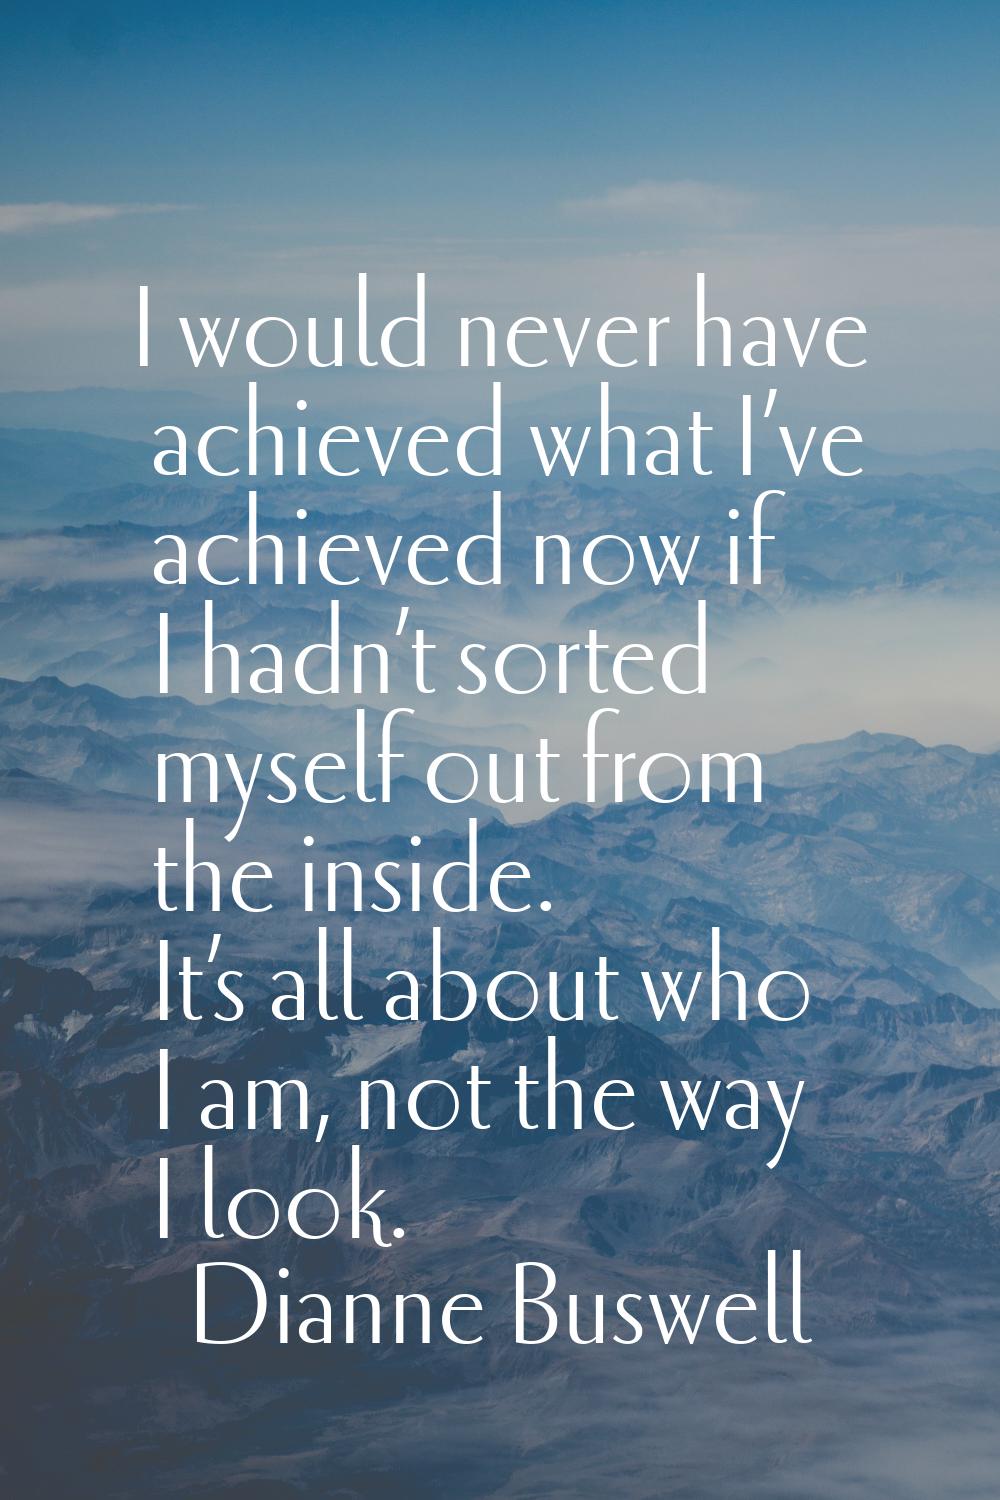 I would never have achieved what I’ve achieved now if I hadn’t sorted myself out from the inside. I